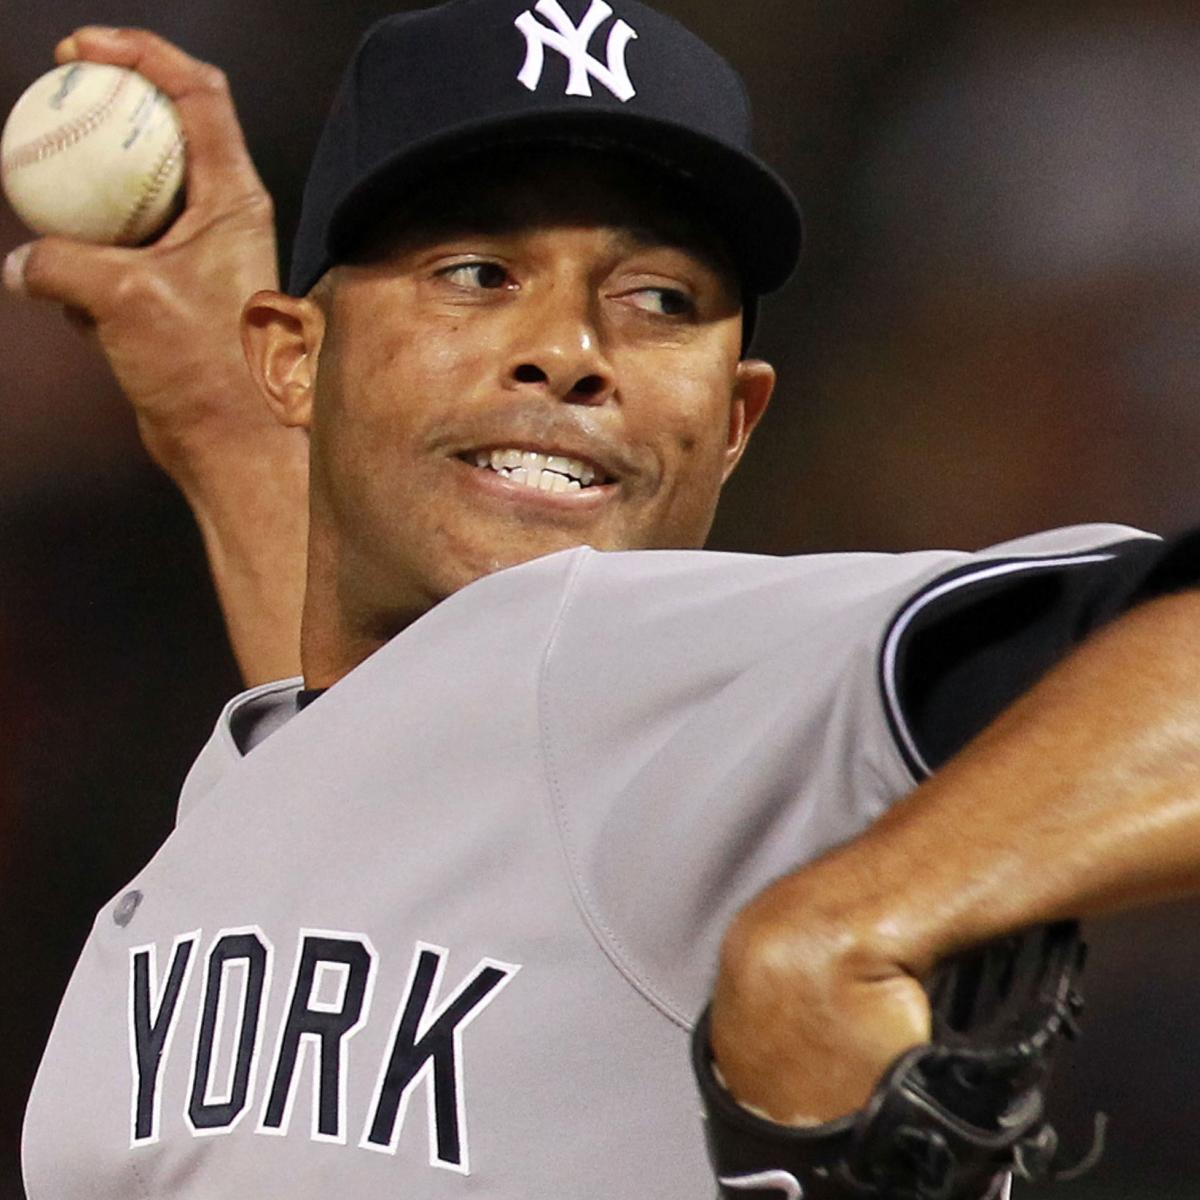 No Mo: Mariano Rivera's legendary career coming to an end